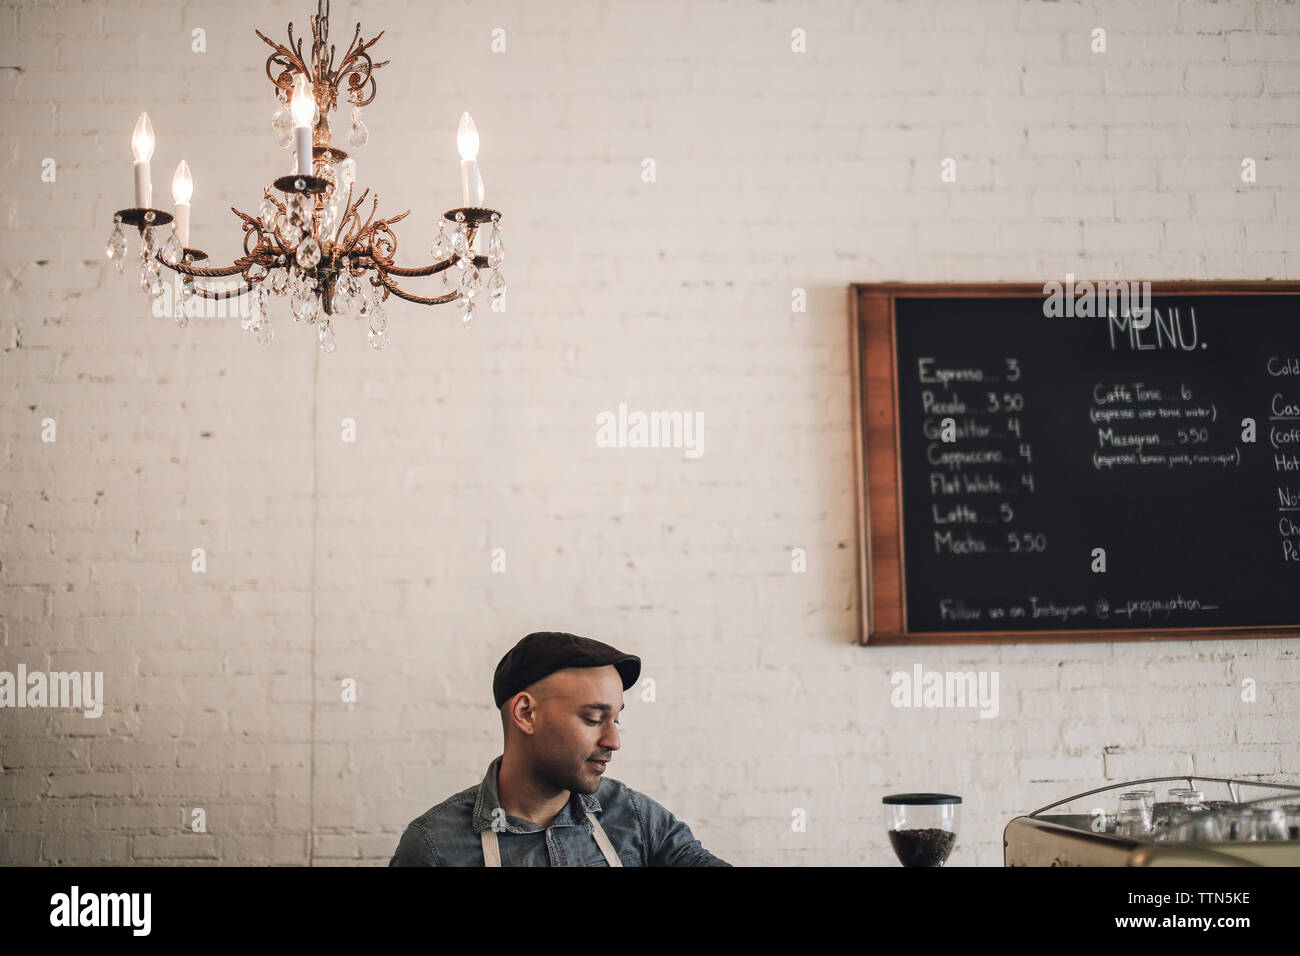 Male owner standing against wall in cafe Stock Photo